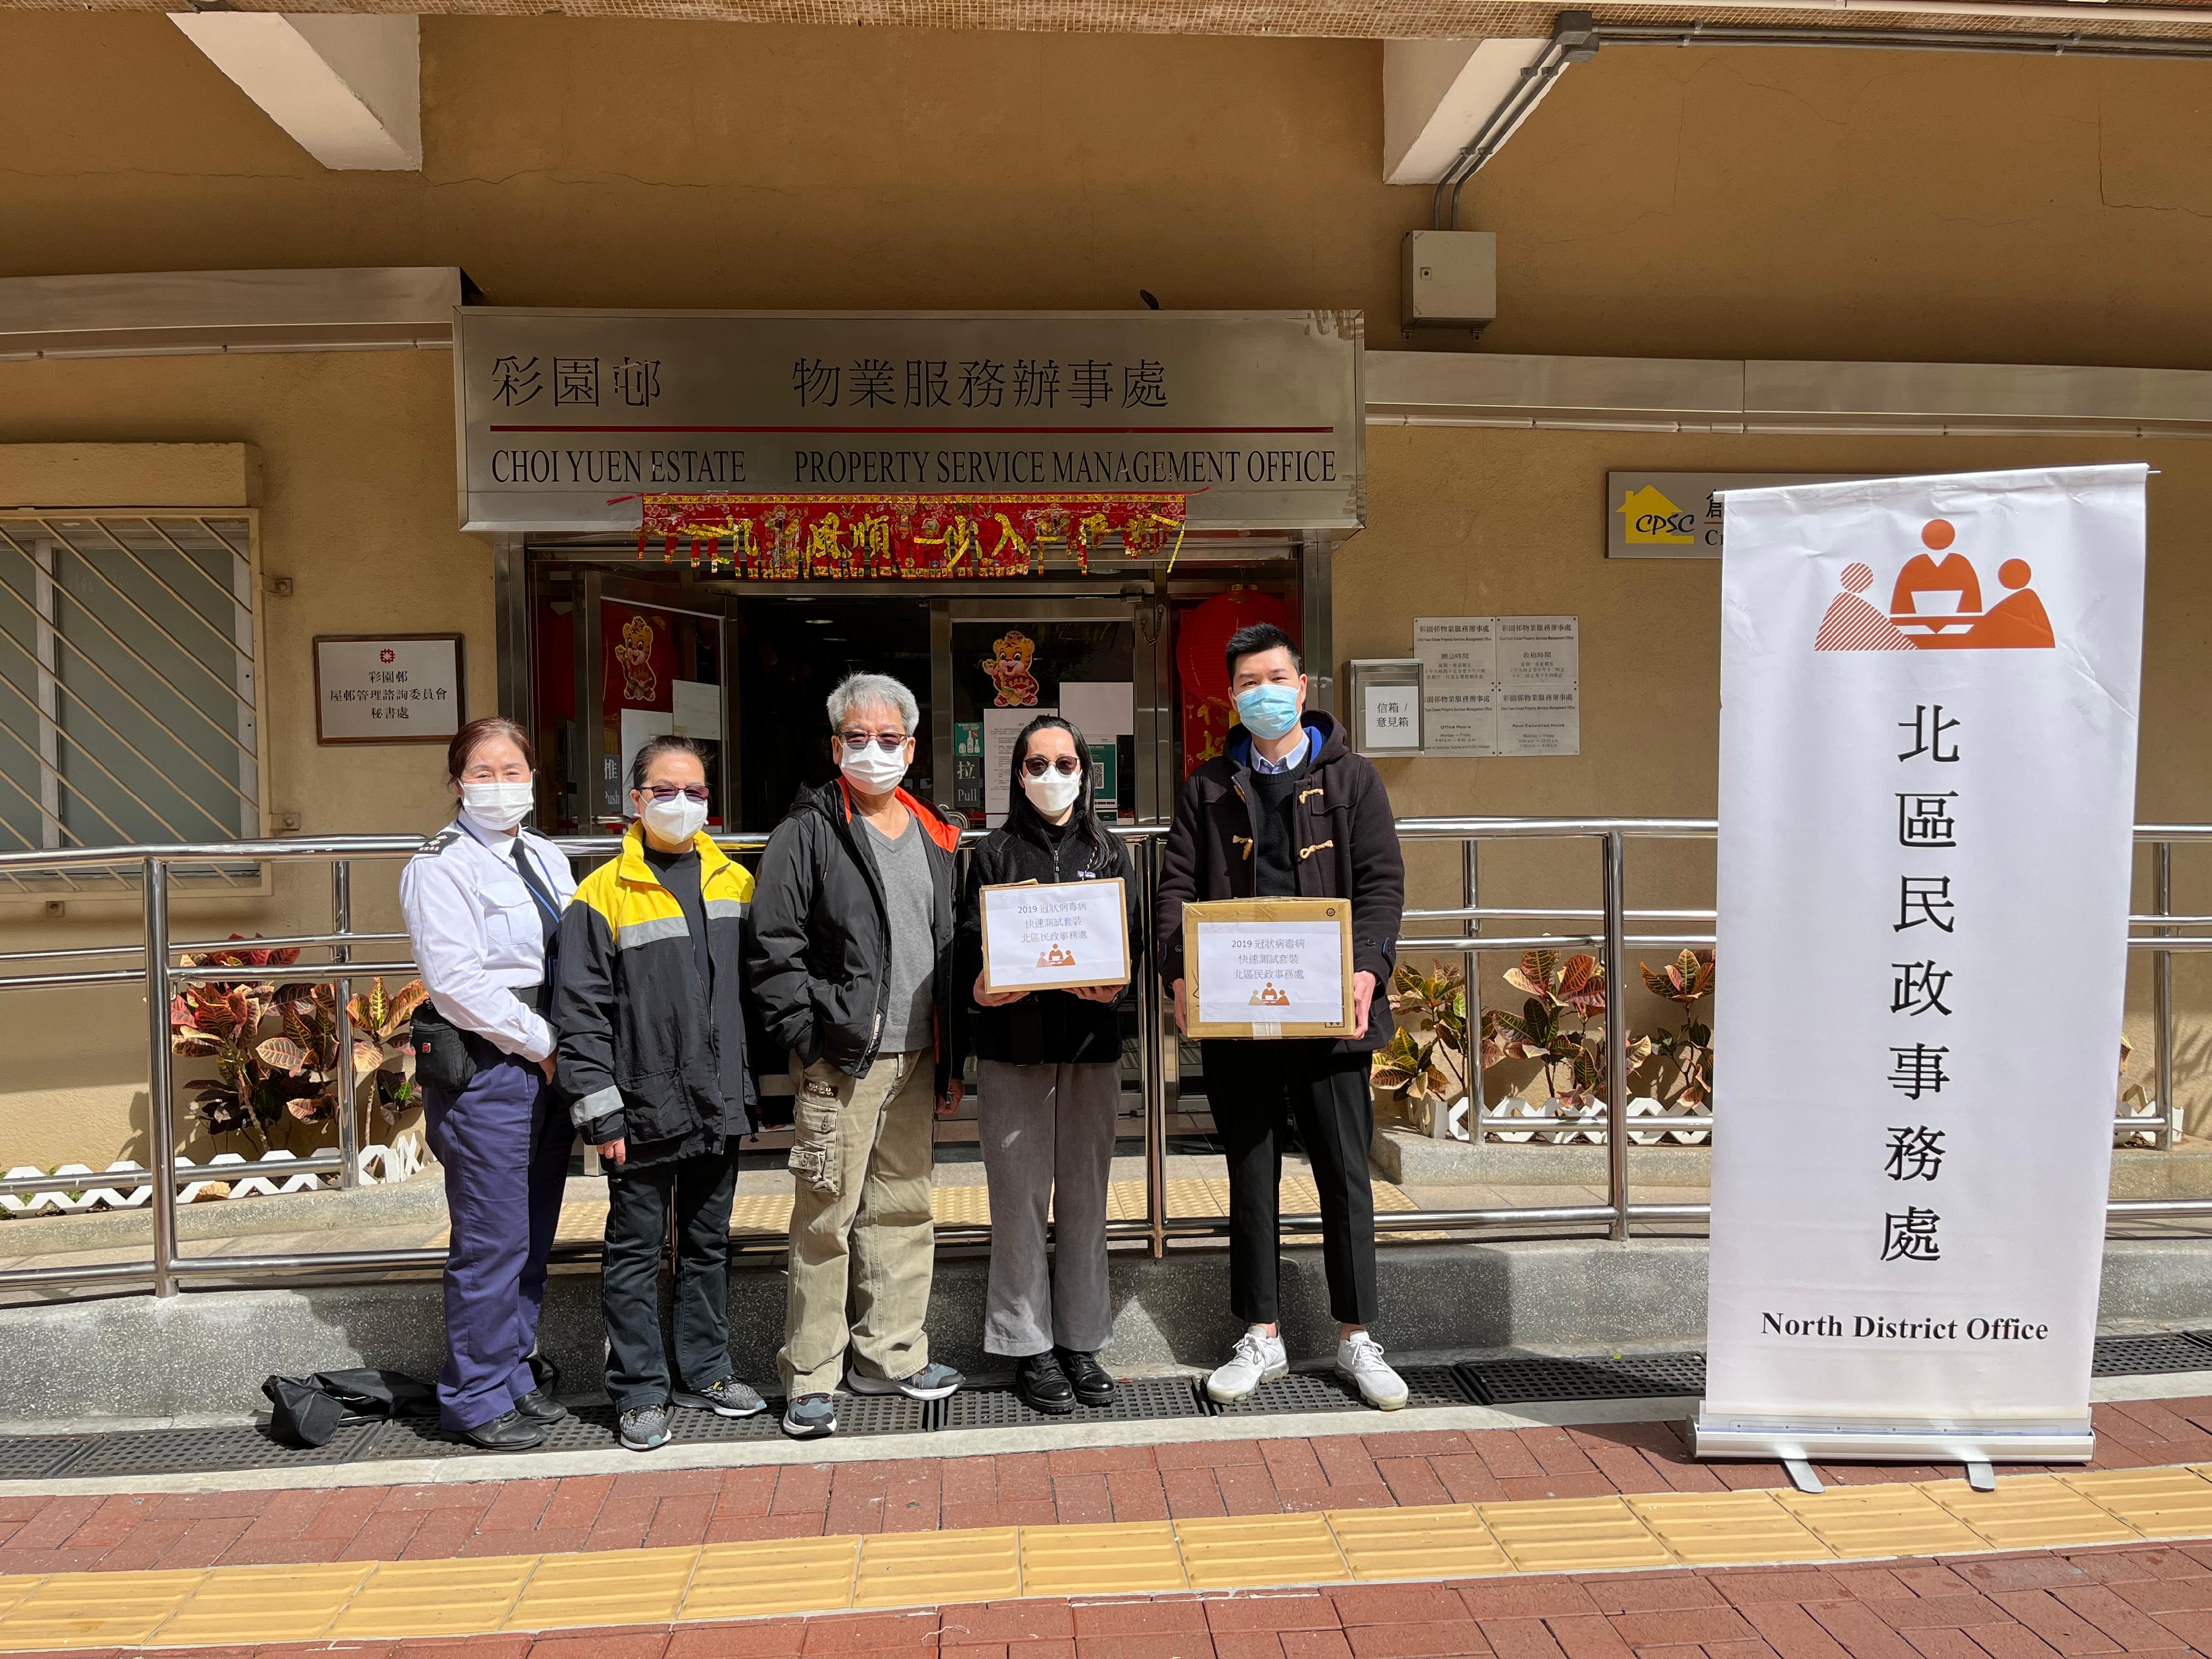 The North District Office today (February 23) distributed COVID-19 rapid test kits to cleansing workers and property management staff working in Choi Yuen Estate for voluntary testing through the Housing Department and the property service management office of the Estate. 